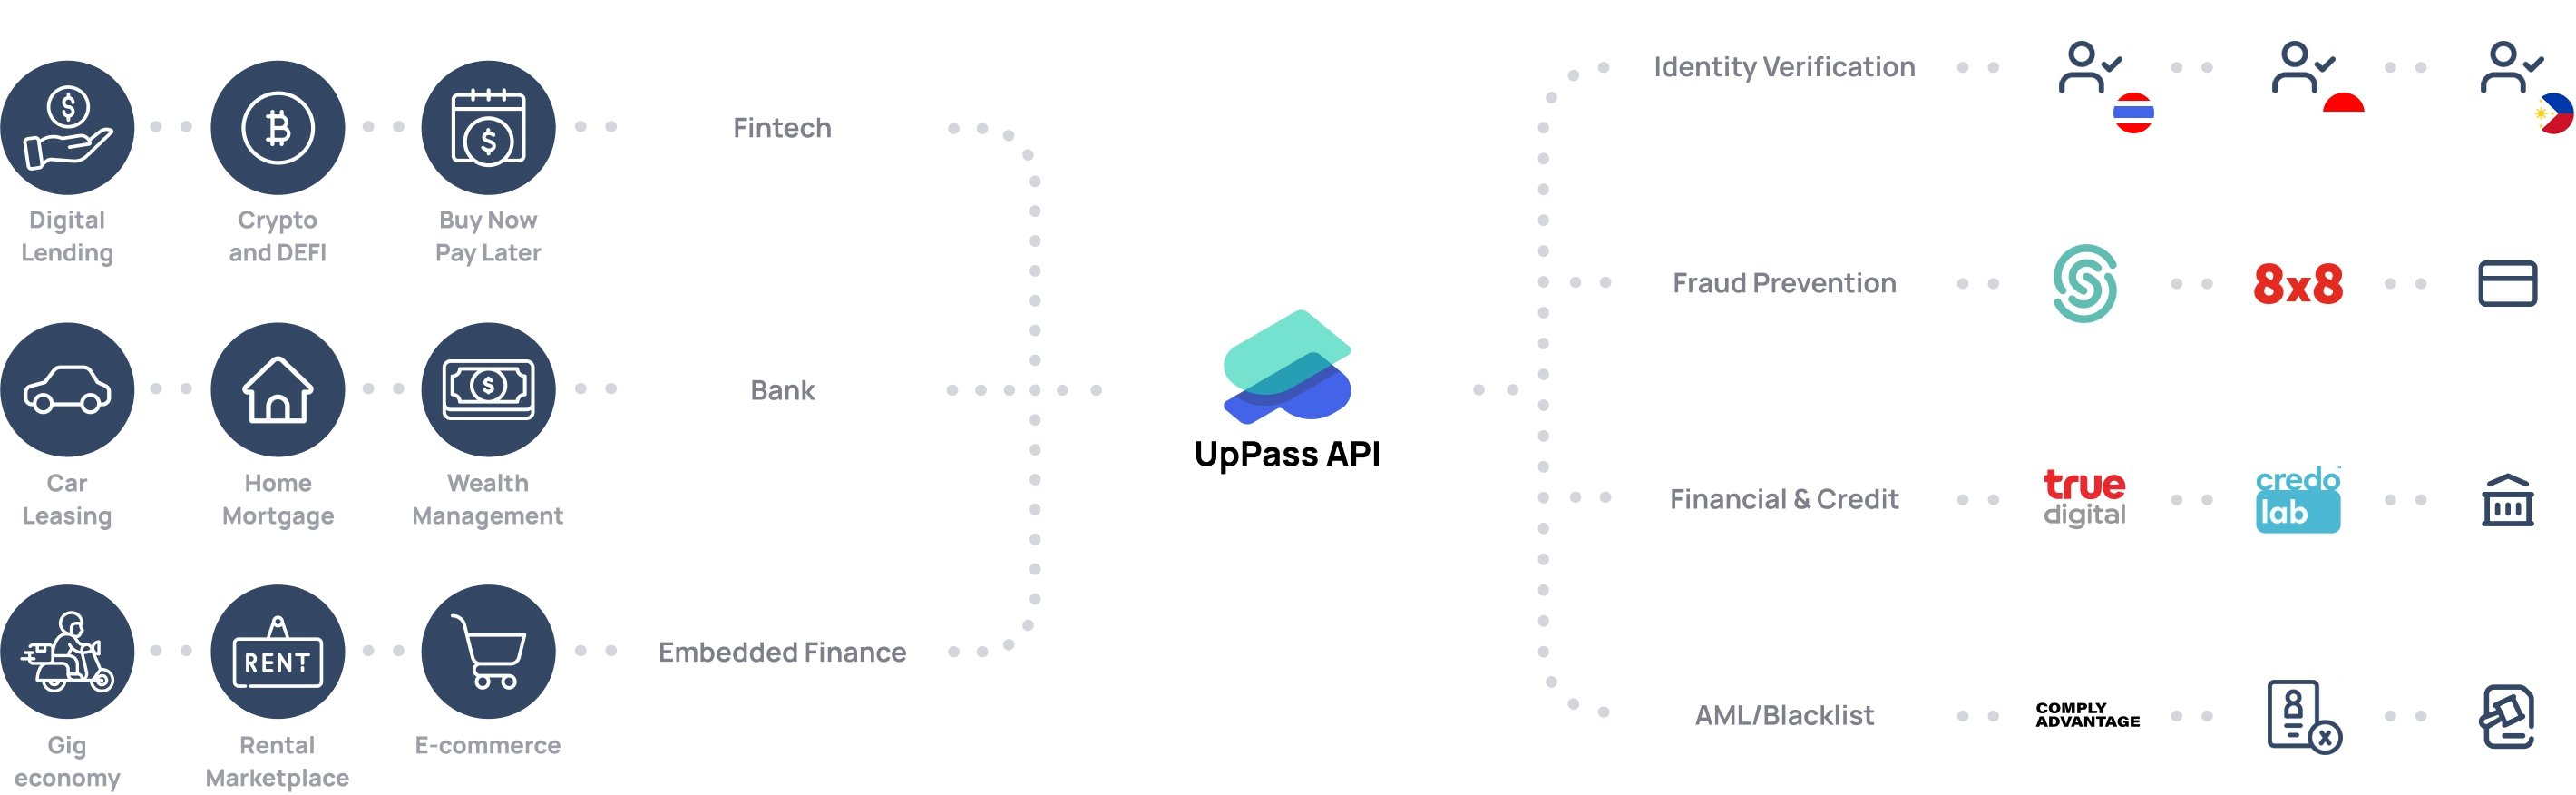 A single API that unifies verification methods, fraud tech, trusted financial and identity data in Southeast Asia.

